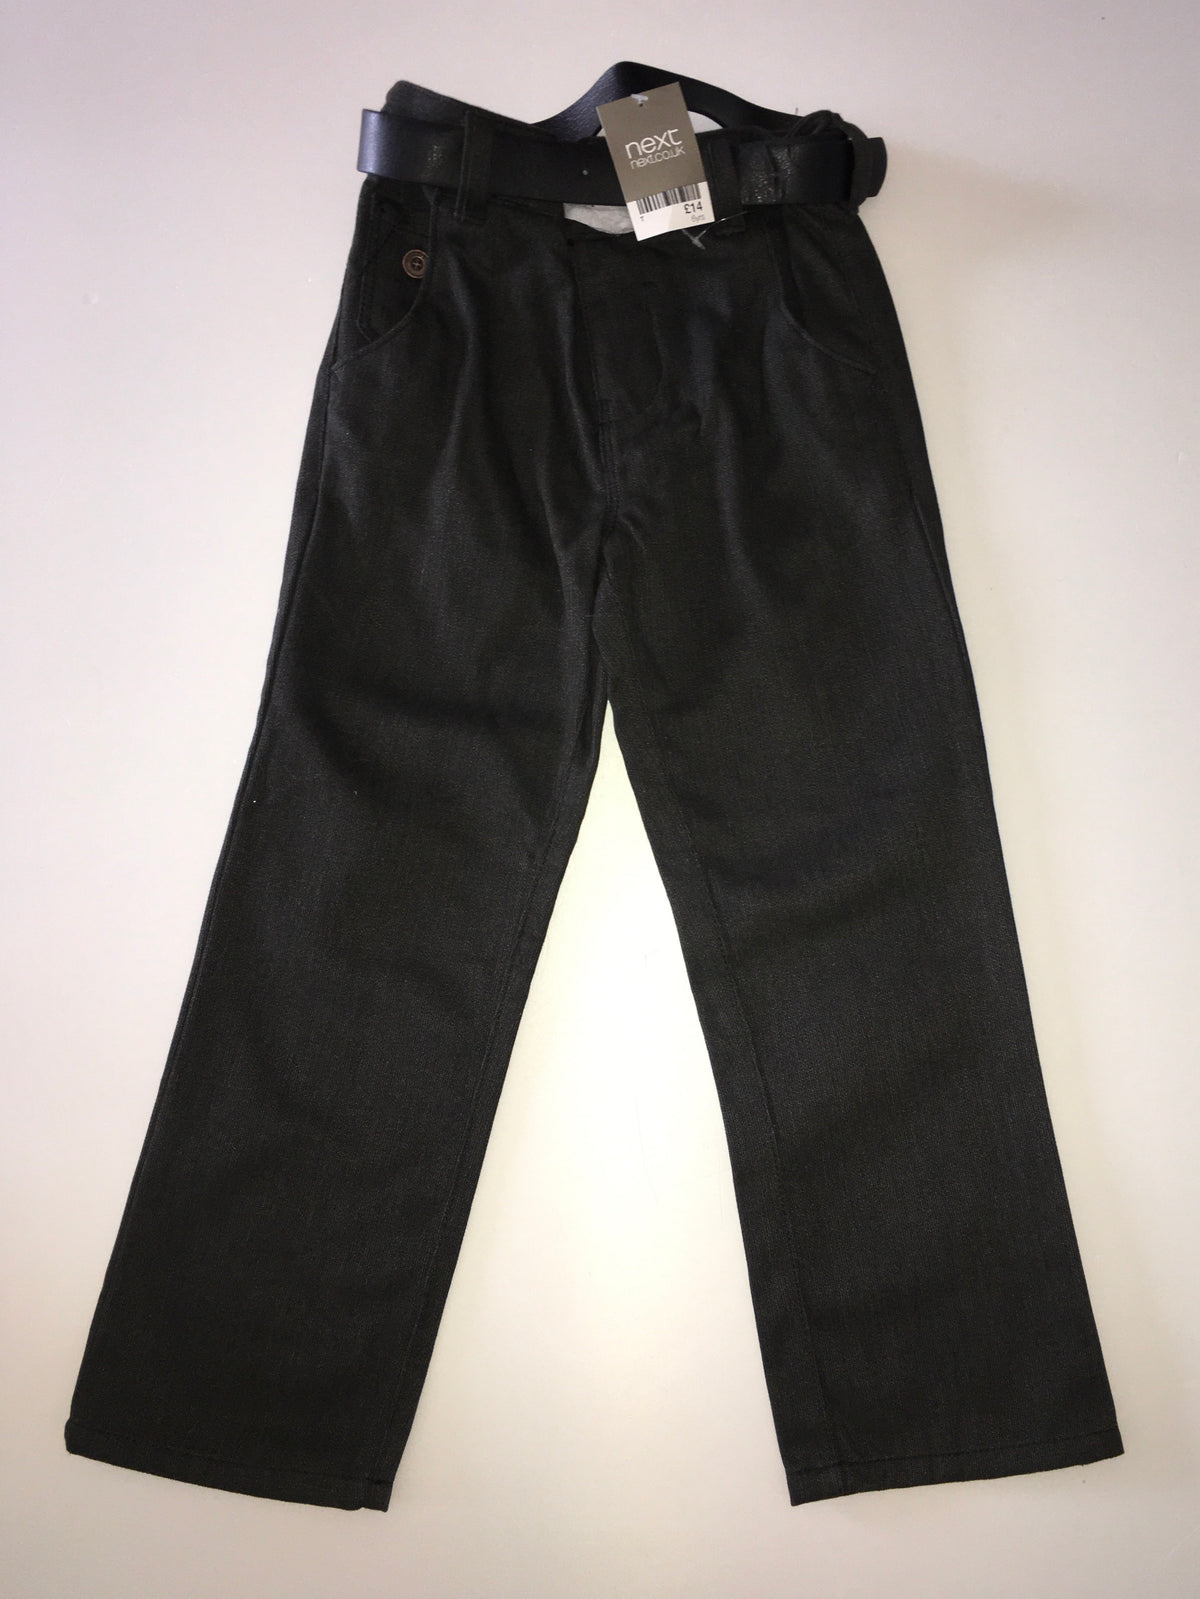 Next Trousers with Belt, BNWT, Boys 5-6/ 6 Years